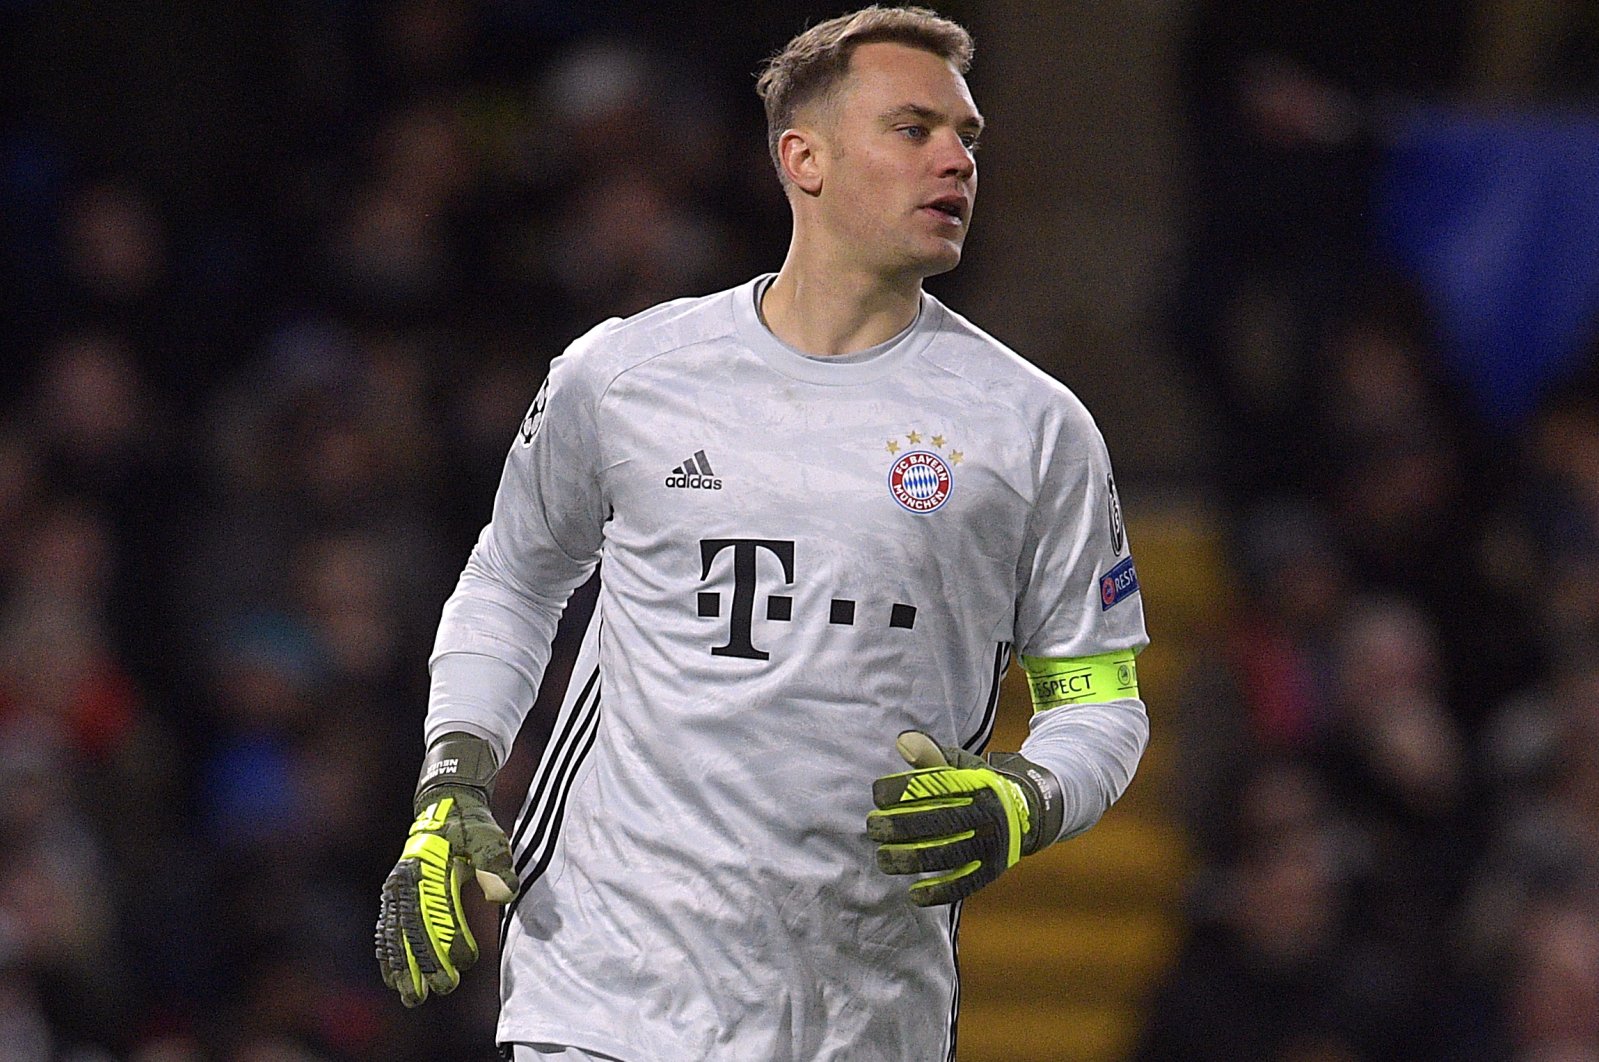 Manuel Neuer reacts during a UEFA Champions League Round match in London, Britain, Feb. 25, 2020. (EPA Photo)